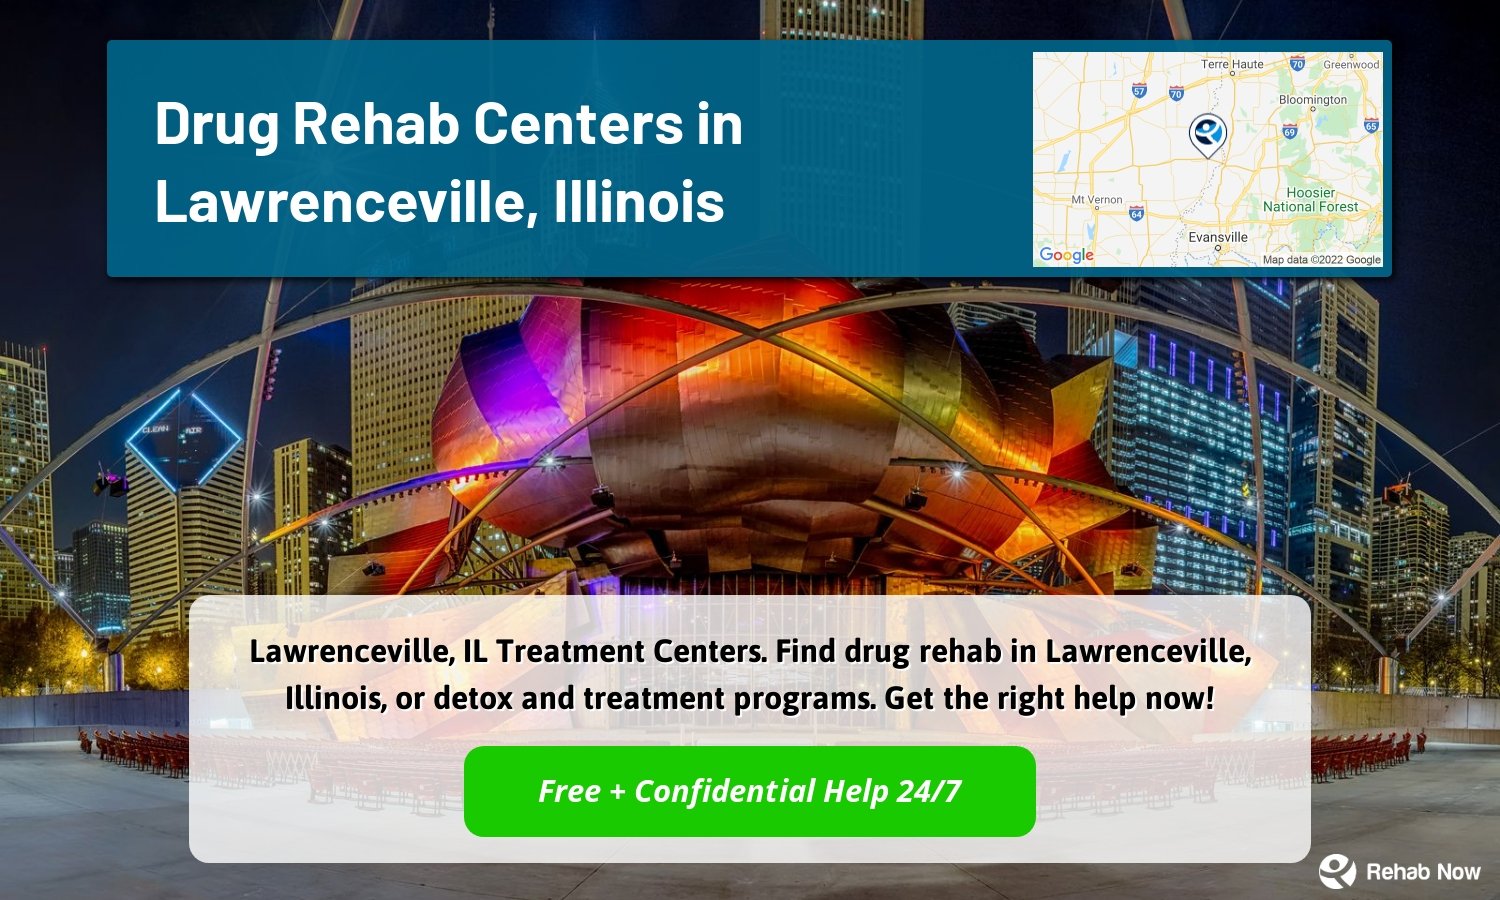 Lawrenceville, IL Treatment Centers. Find drug rehab in Lawrenceville, Illinois, or detox and treatment programs. Get the right help now!